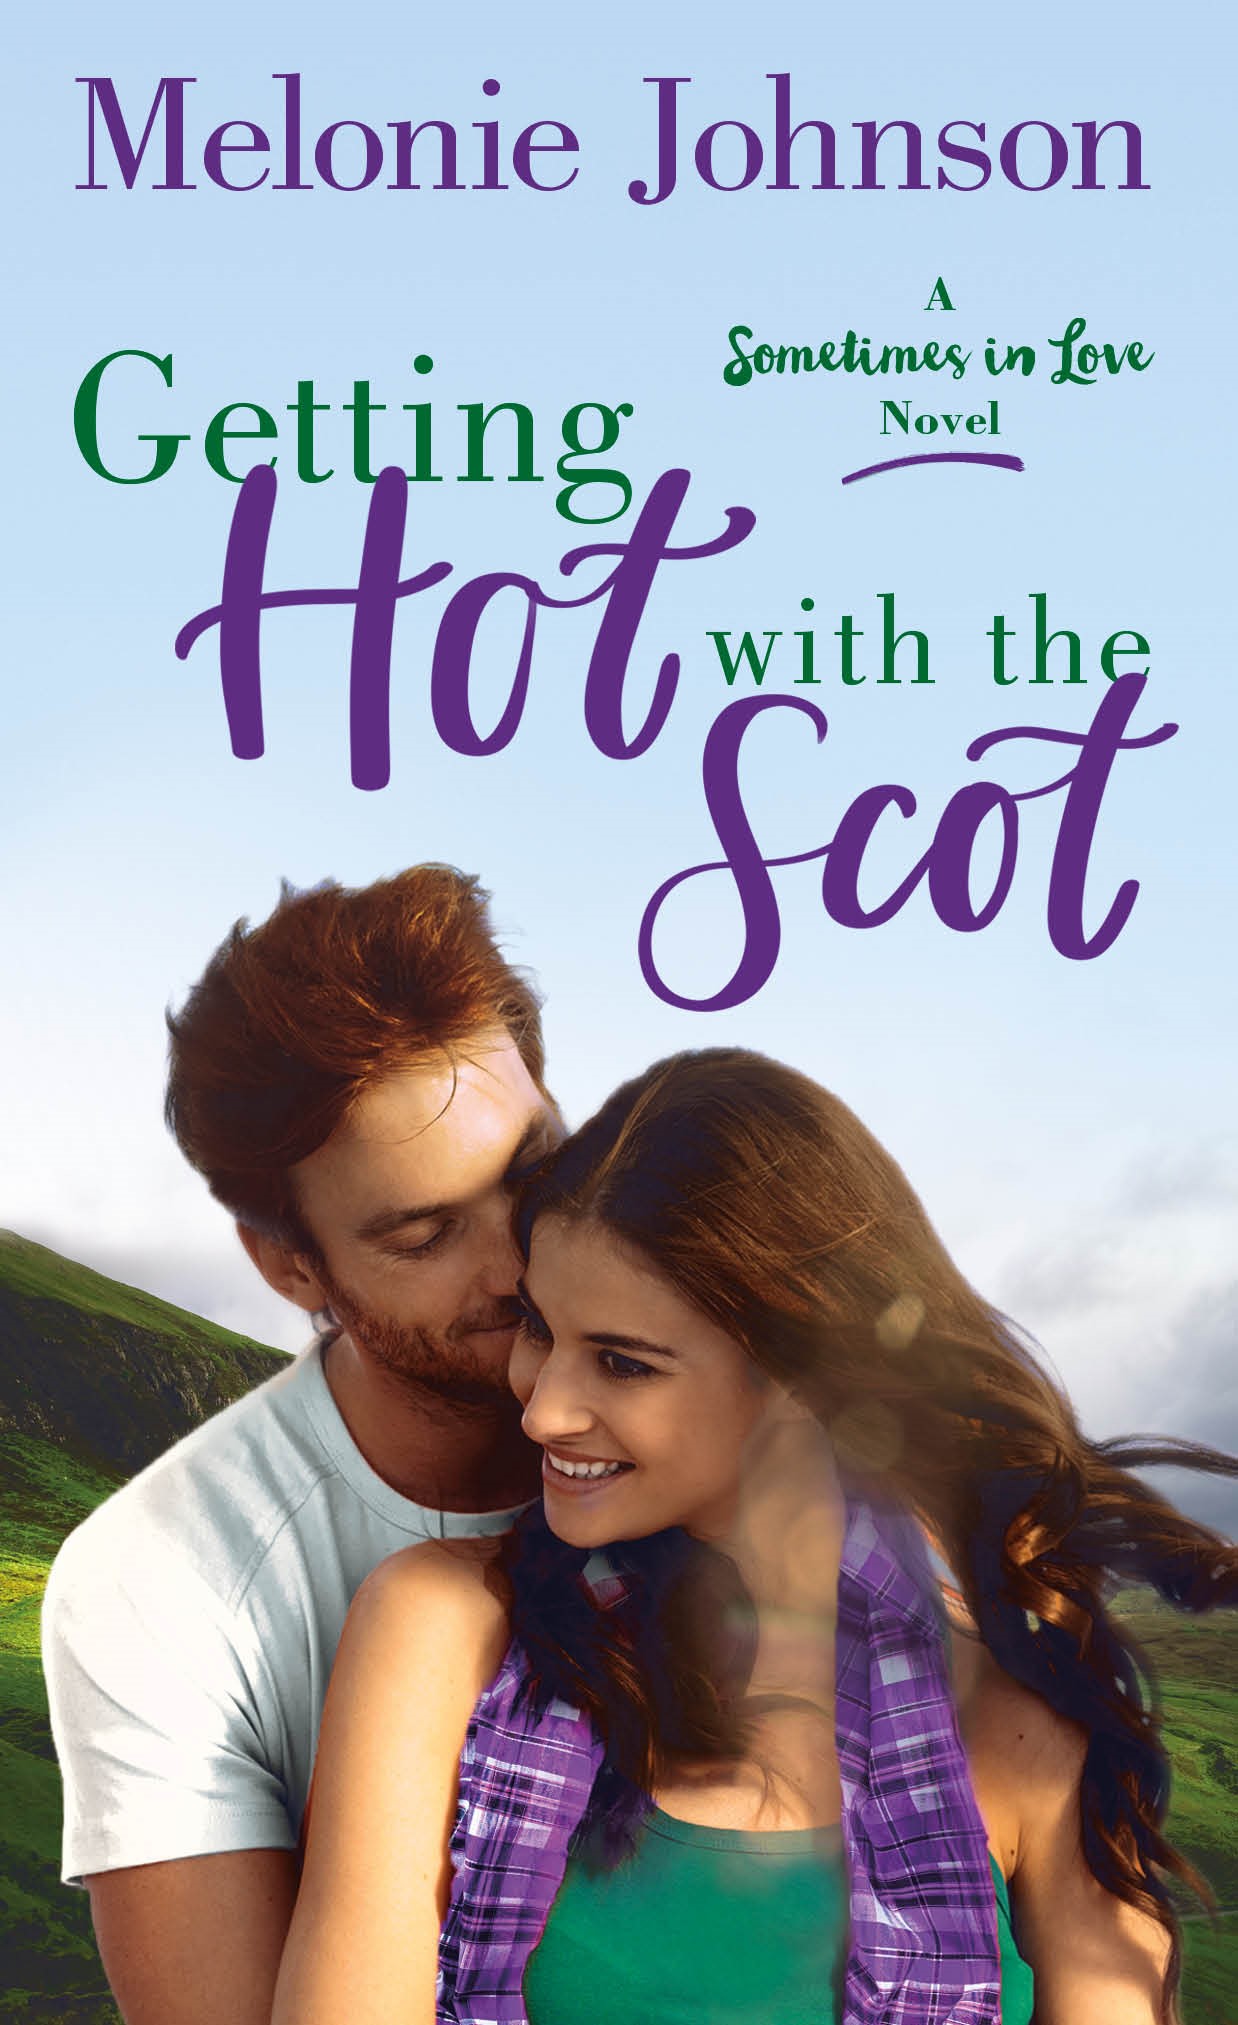 Getting Hot with the Scot by Melonie Johnson